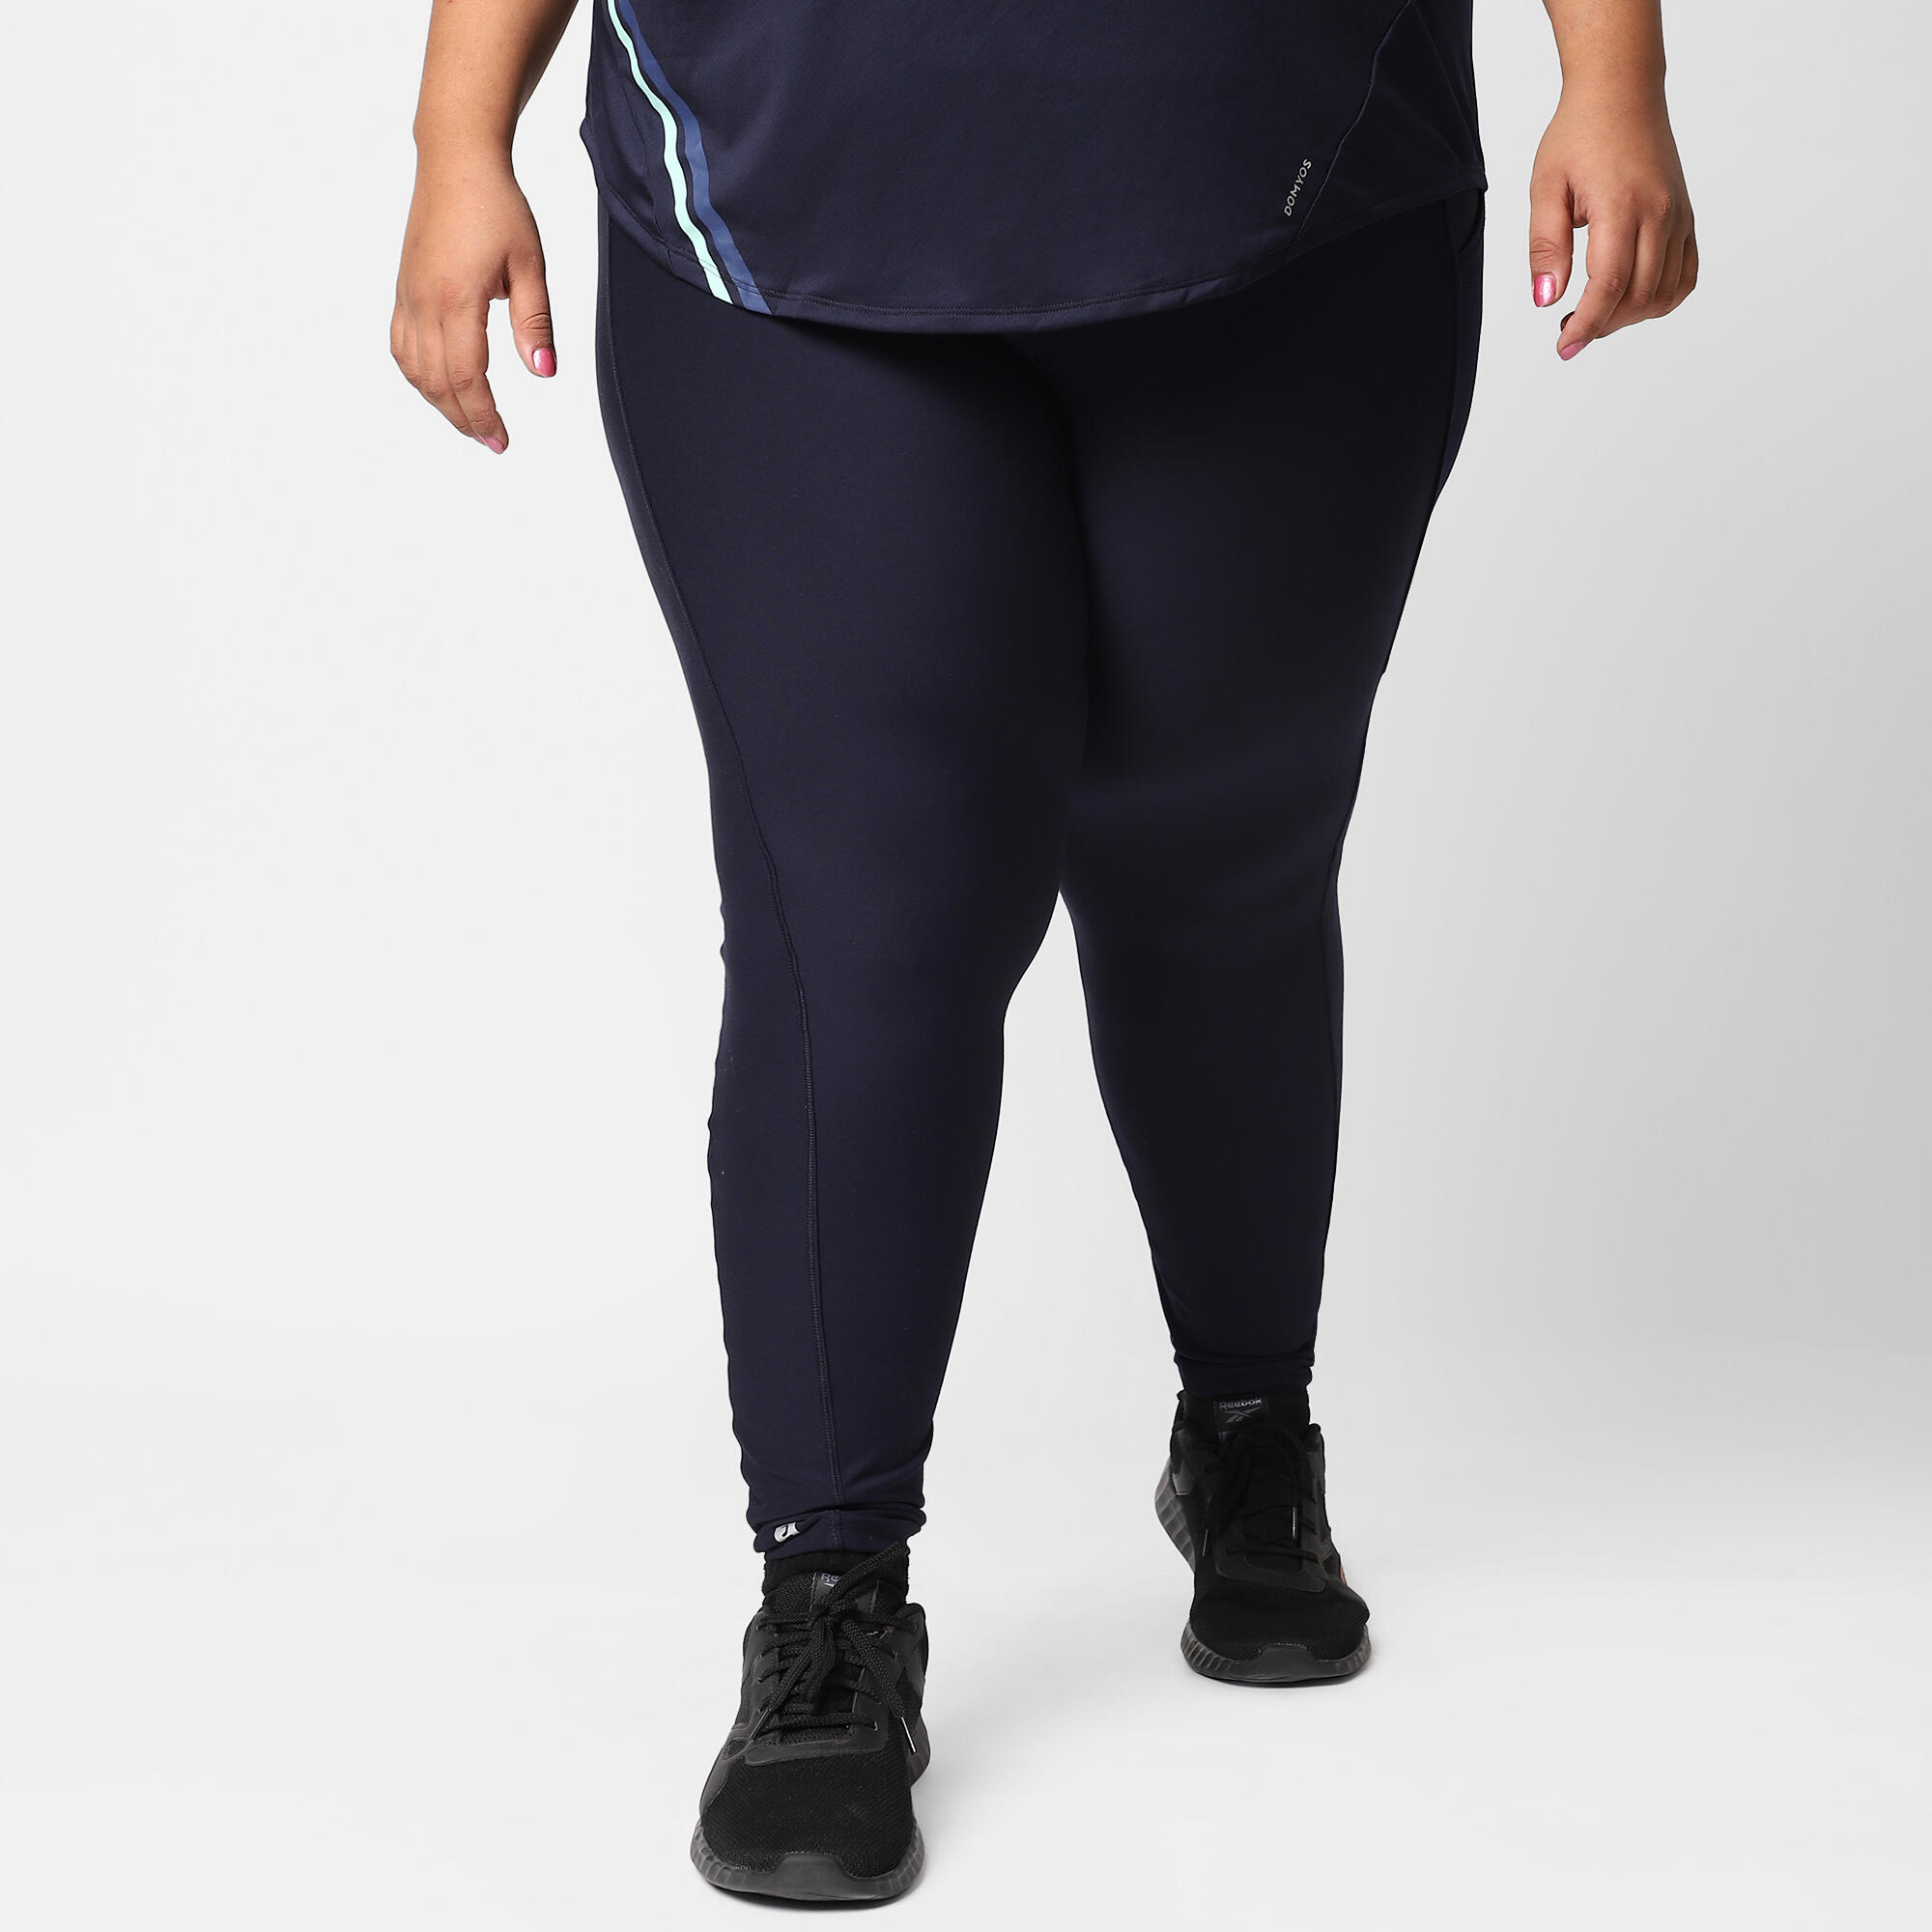 How To Wear Leggings When You Are Plus Size | International Society of  Precision Agriculture